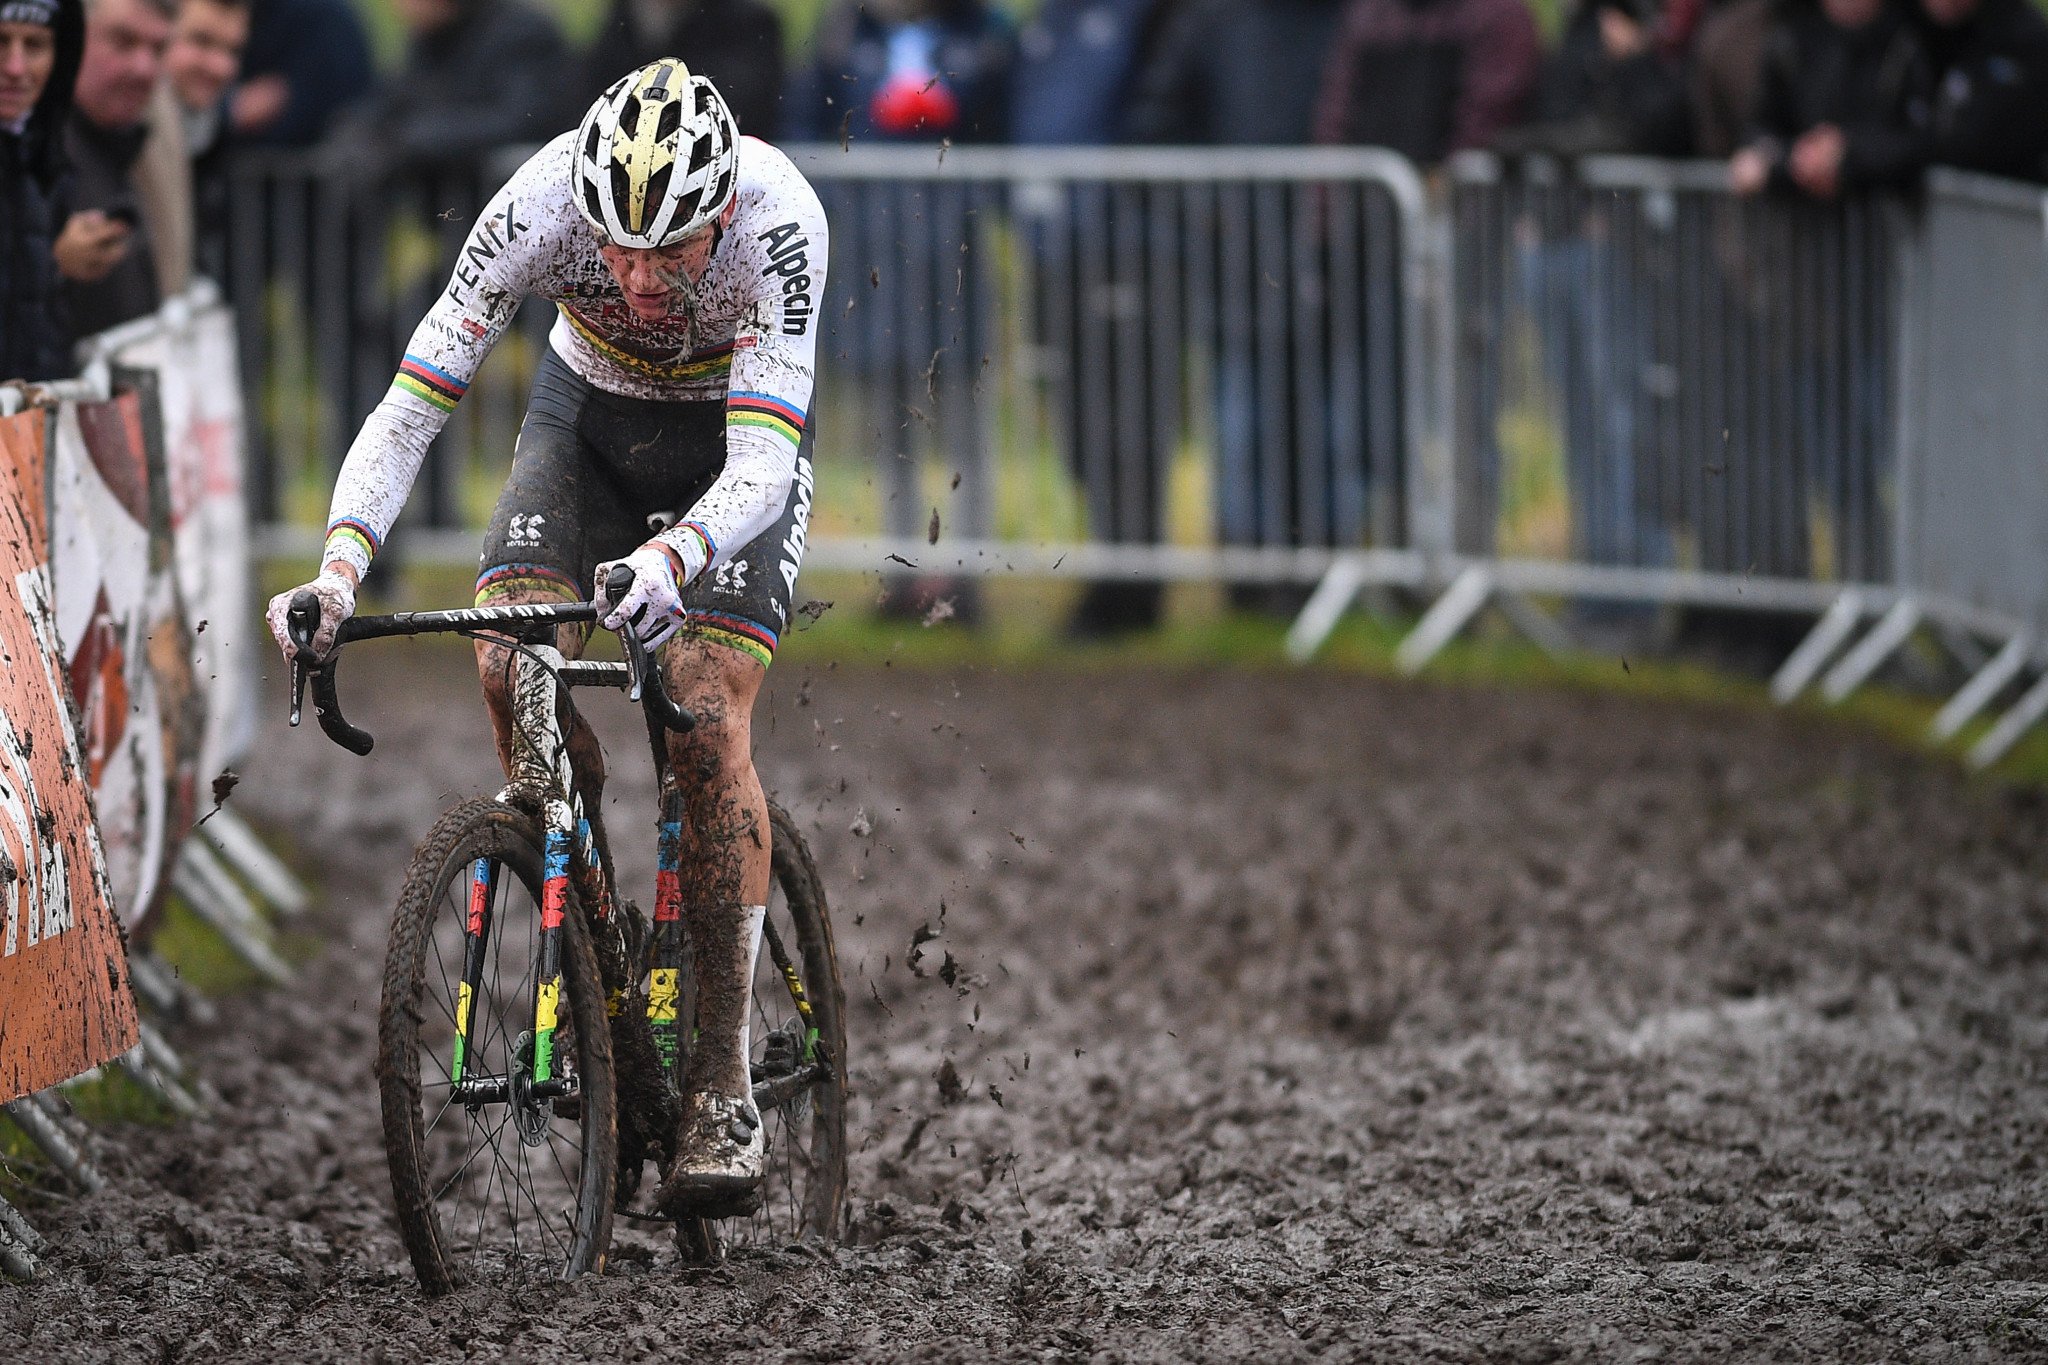 Van der Poel eyes title defence at UCI Cyclo-cross World Championships in Dübendorf 